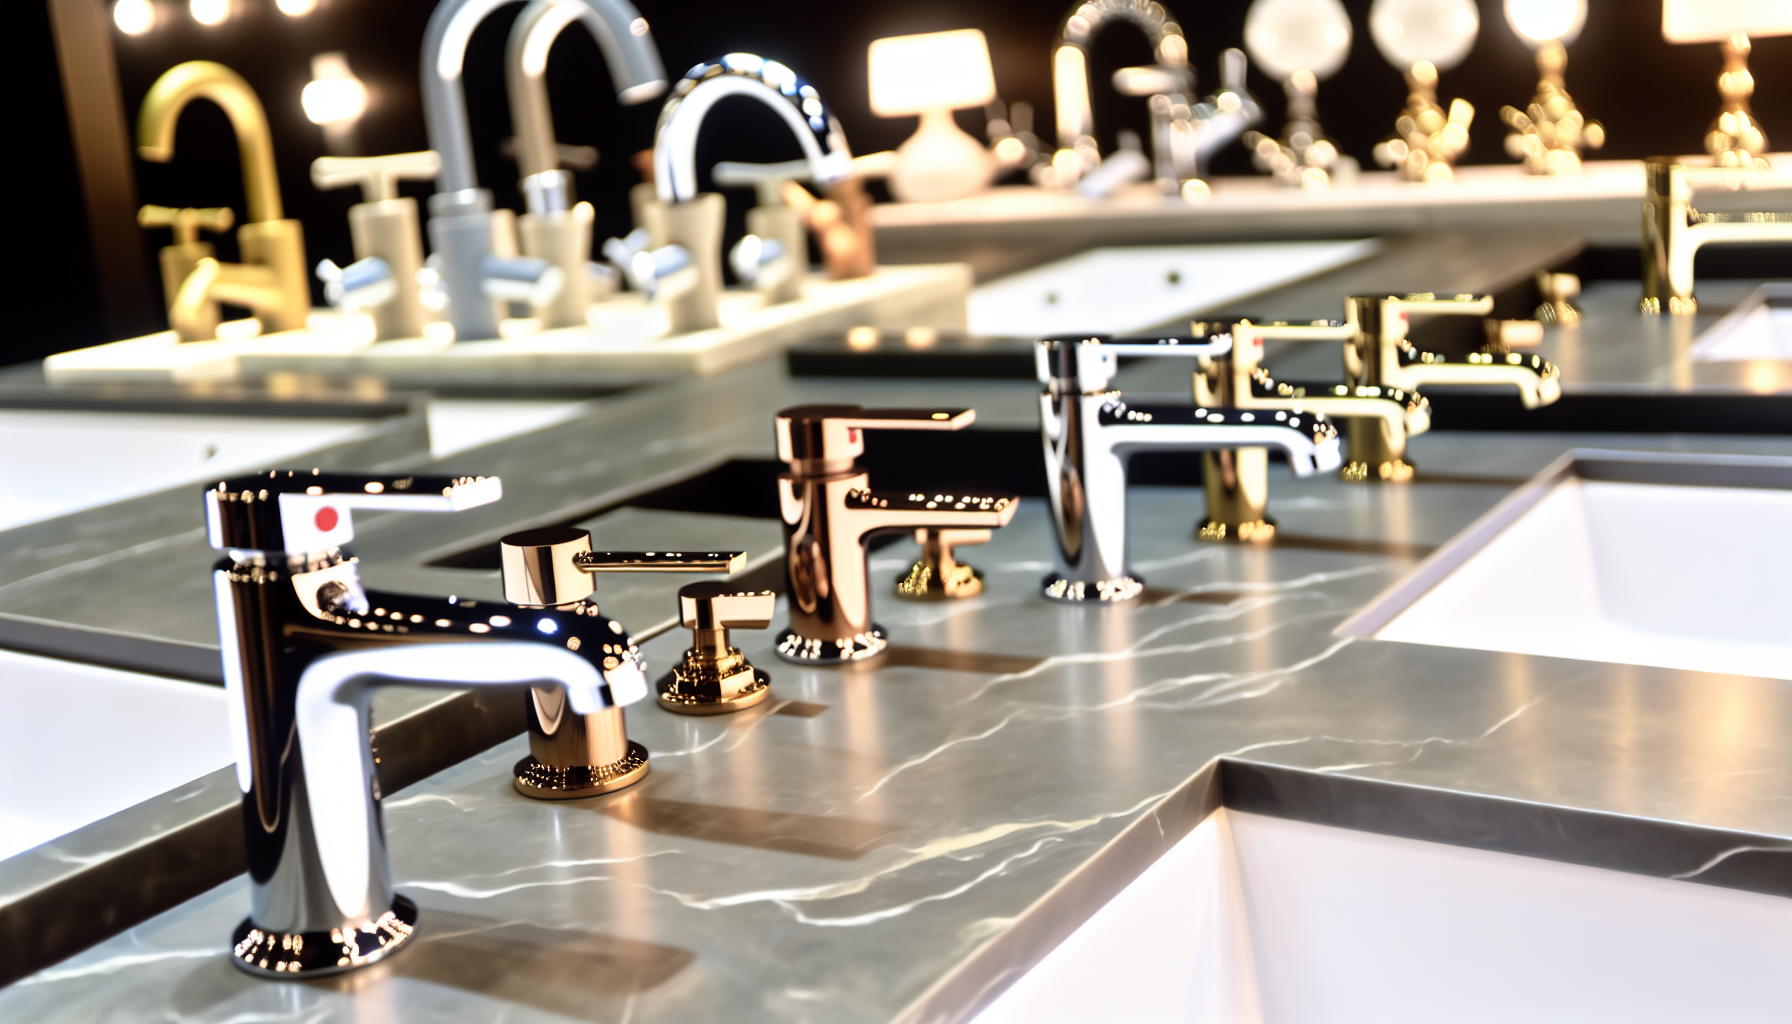 Variety of bathroom taps including basin taps, mixers, shower taps, and bath faucets